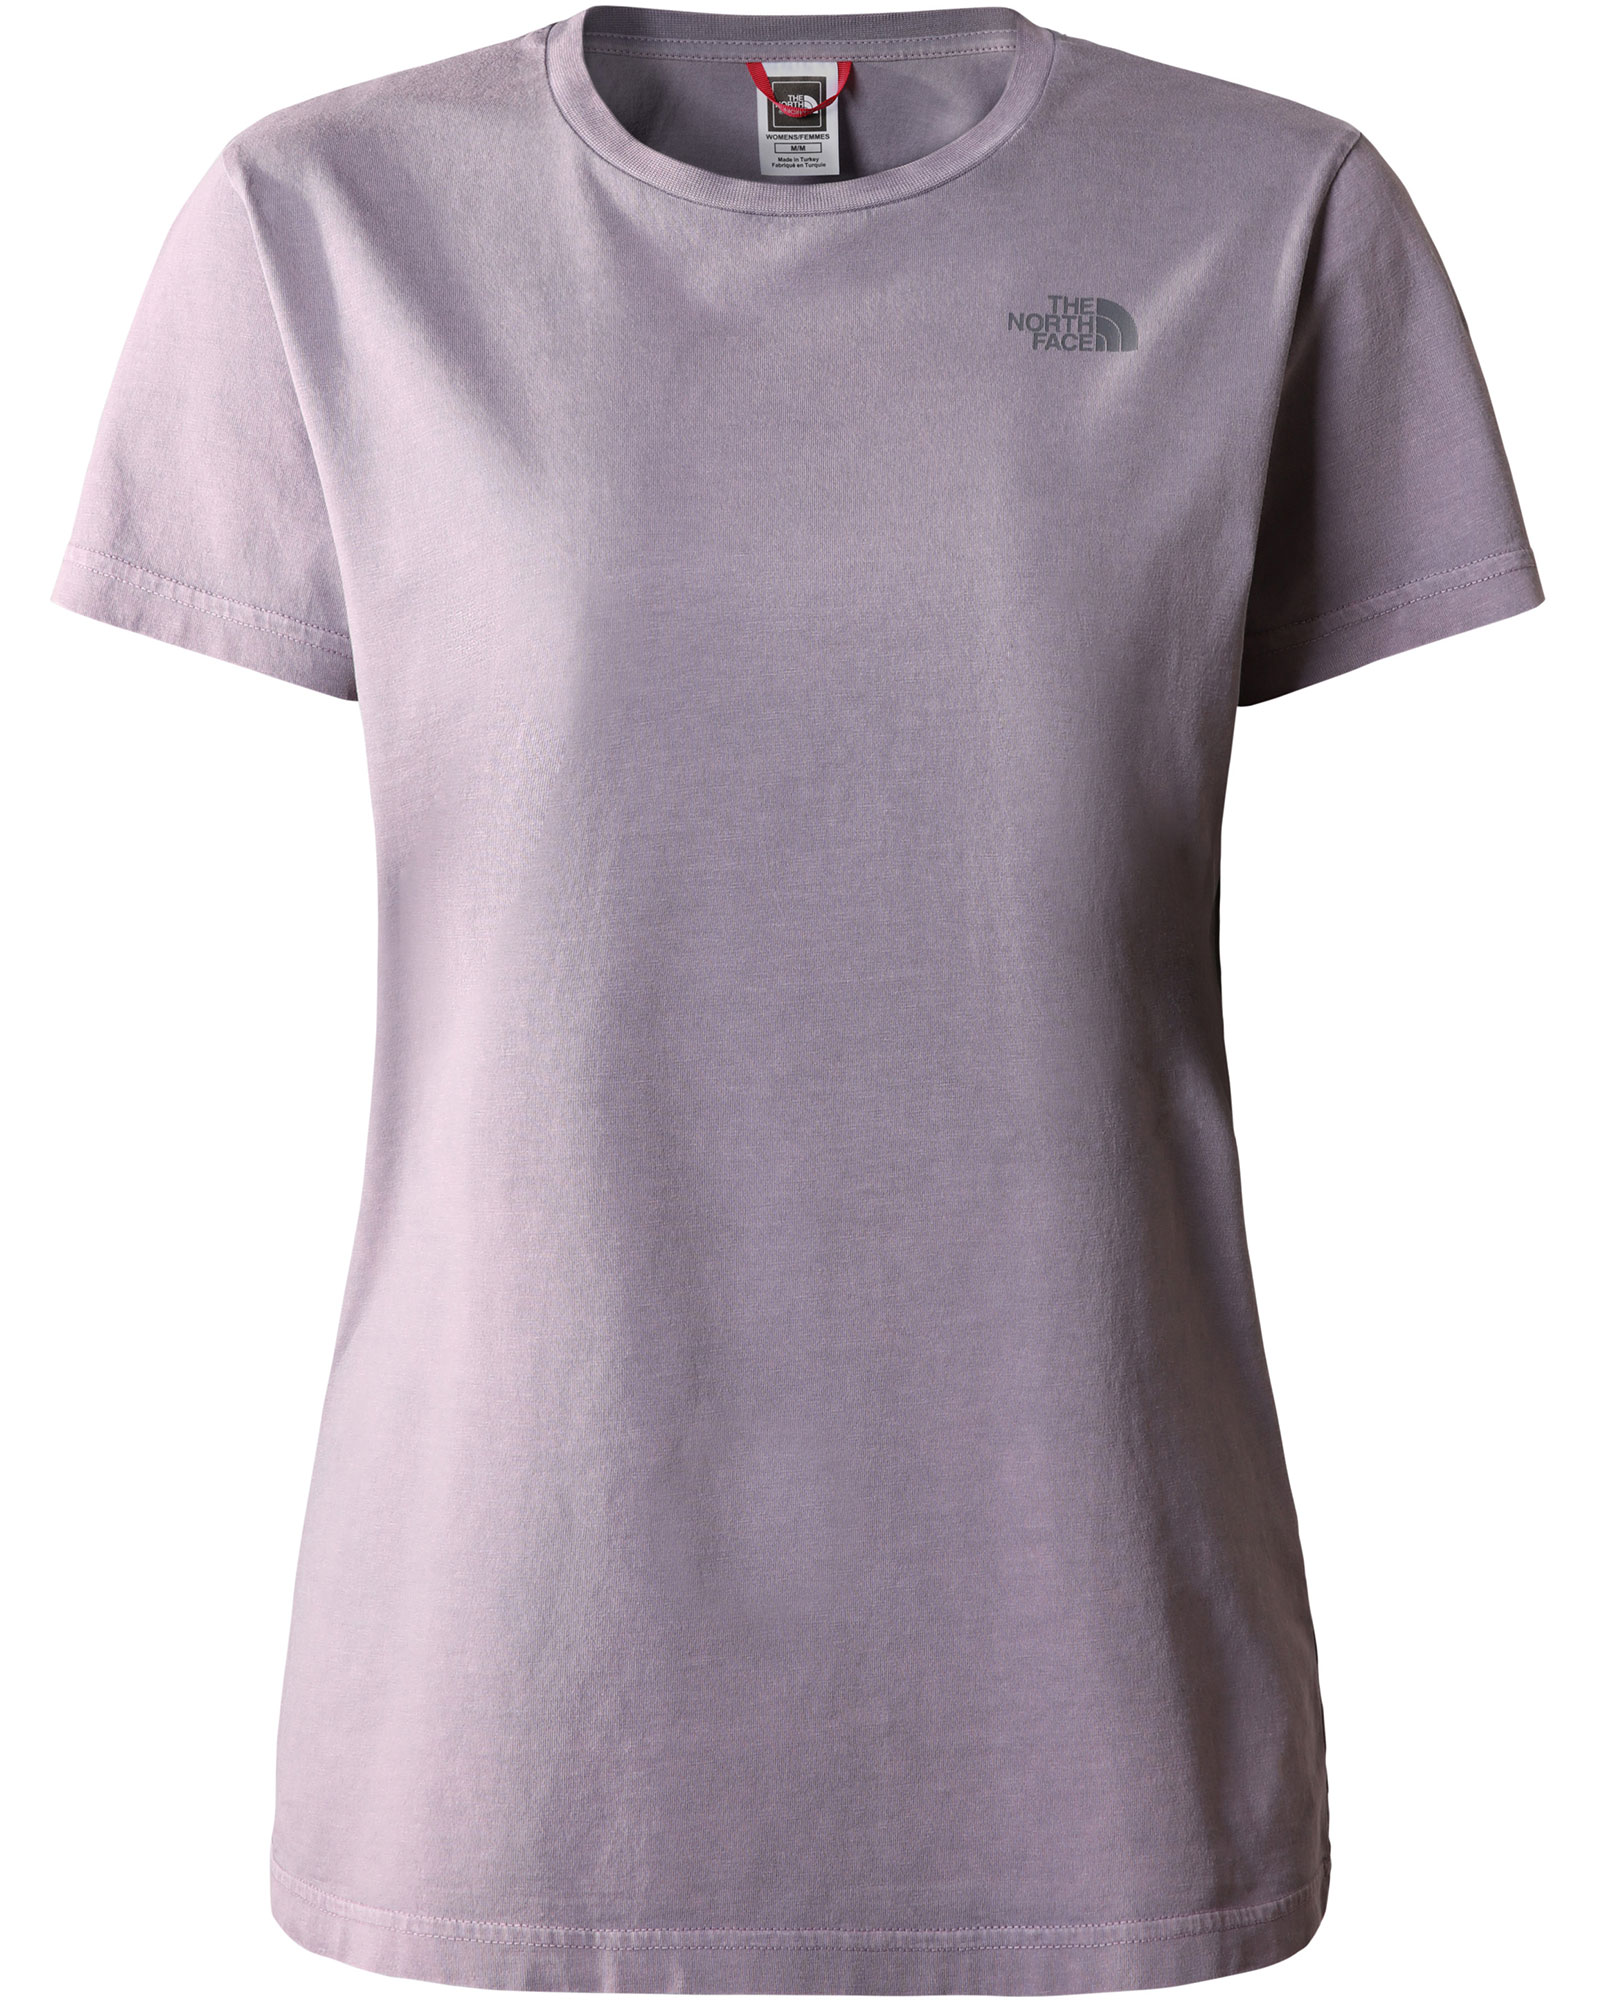 The North Face Womens Heritage Dye Pack Logowear T-shirt